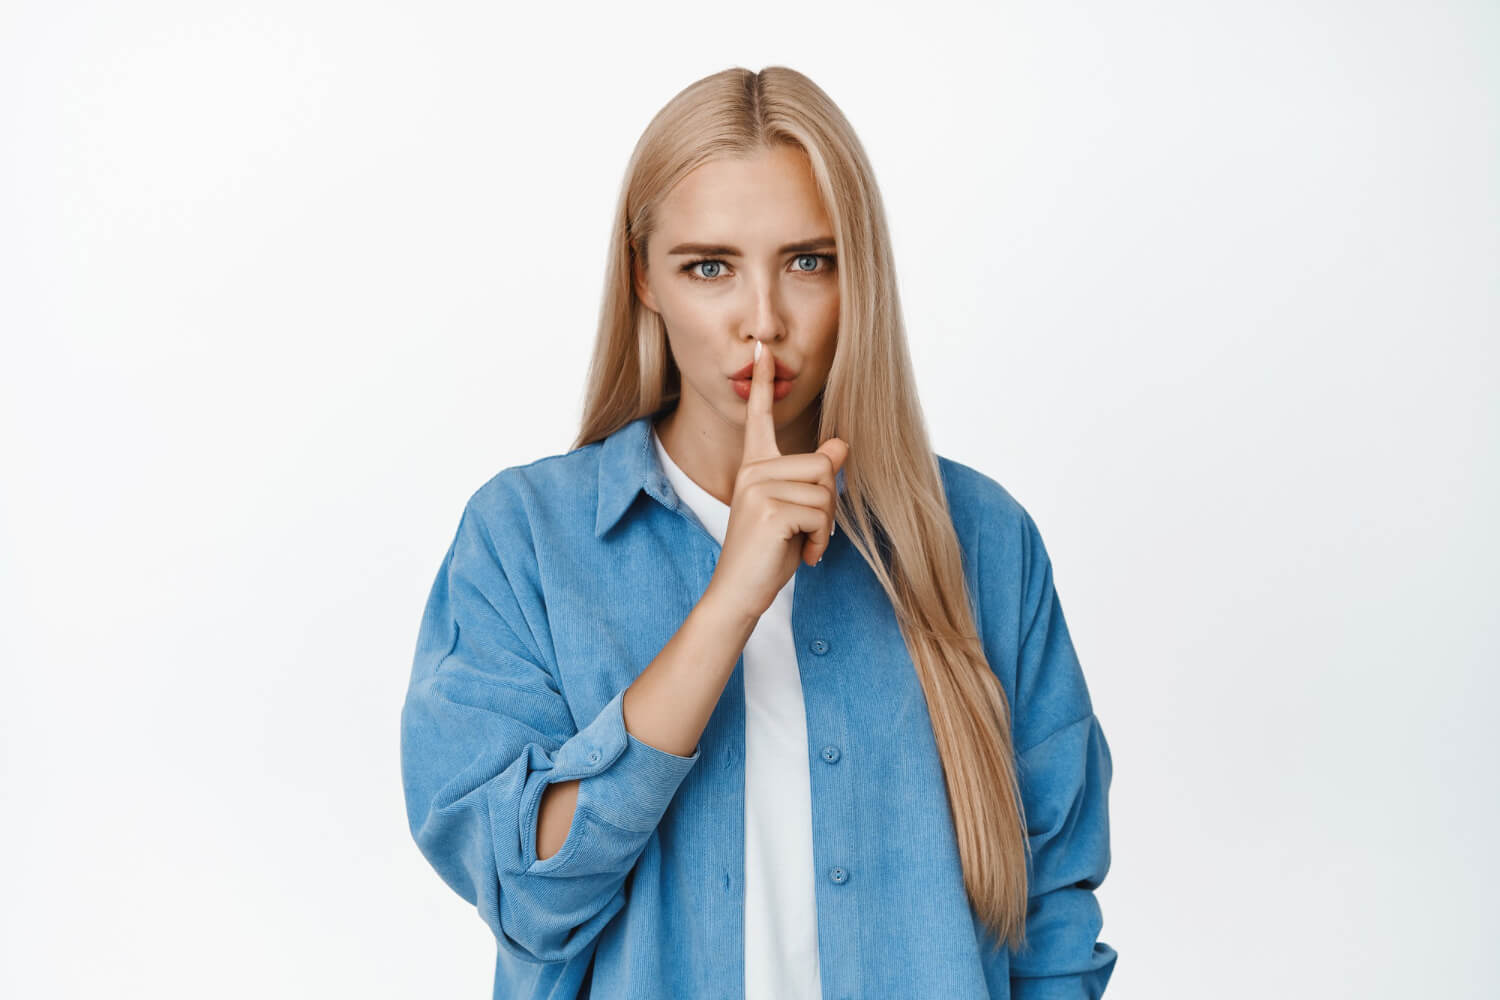 Blond woman making a shhh gesture with her hand on her lips